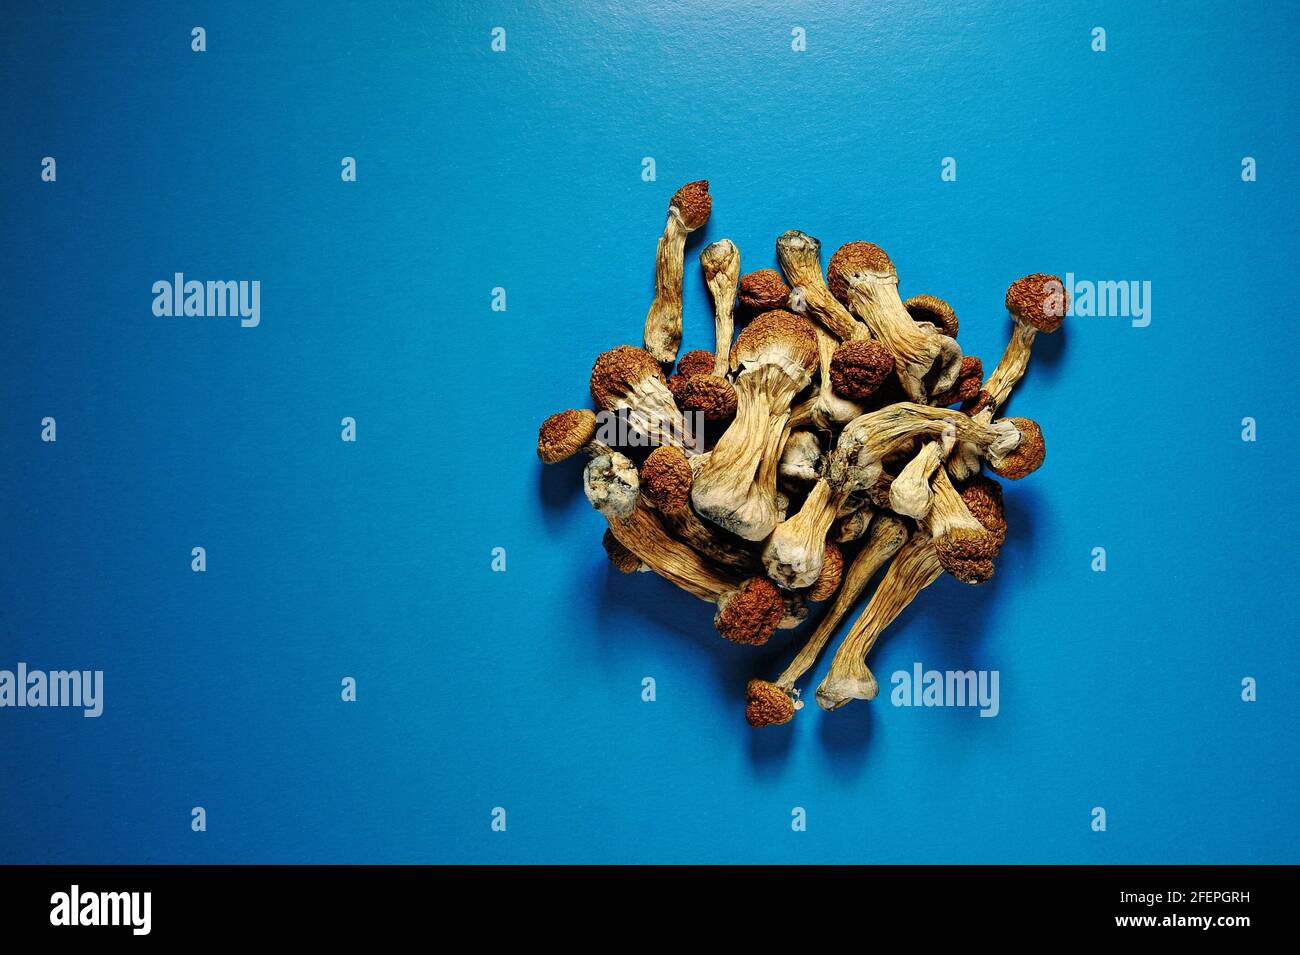 Dry psilocybin mushrooms on blue background. Psychedelic, mind-blowing, magic mushroom. Medical use. Microdosing concept. Stock Photo